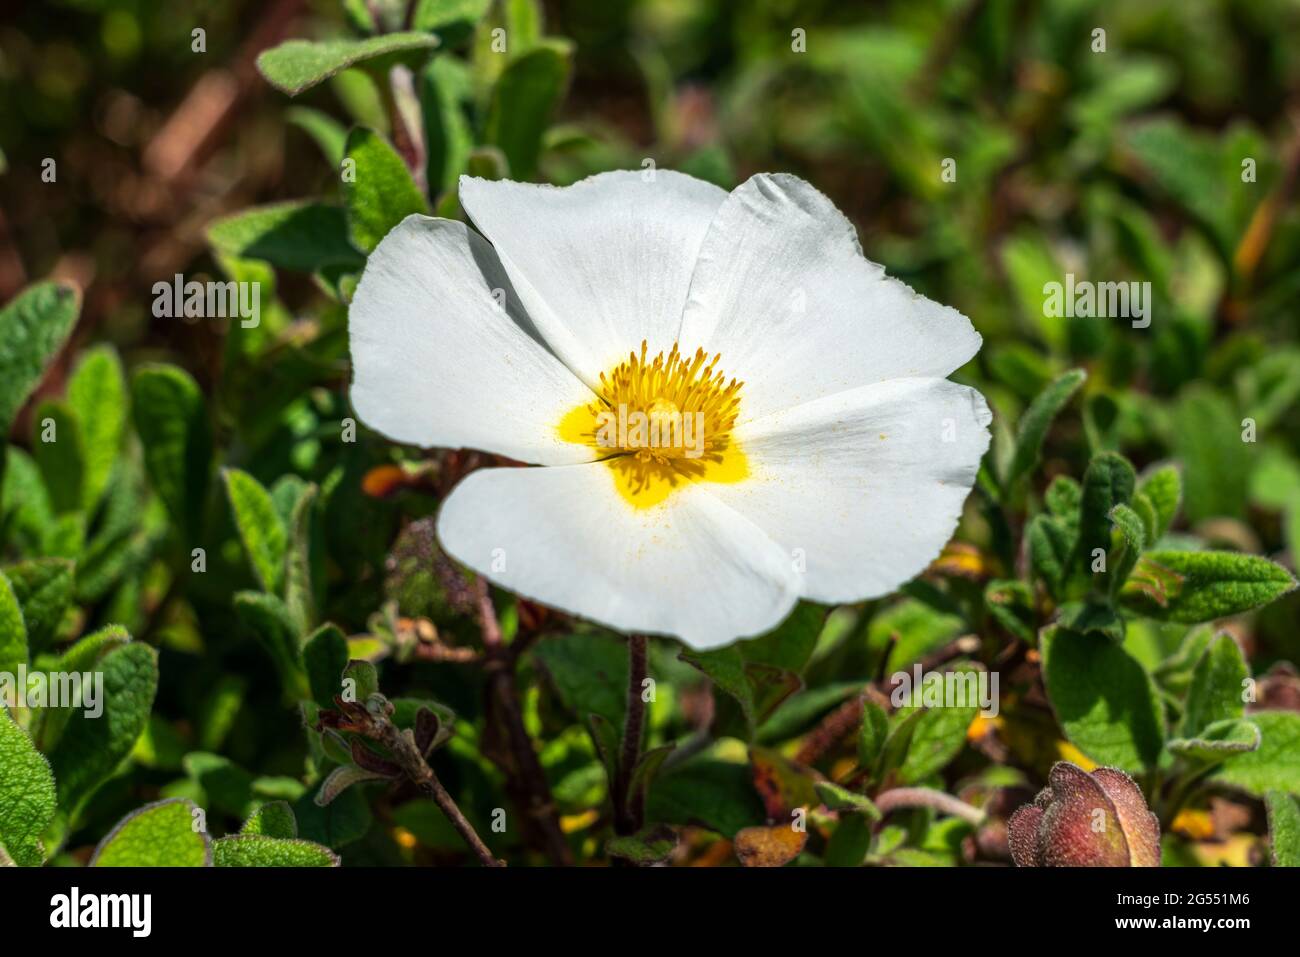 Cistus x corbariensis a summer flowering compact shrub plant with a white summertime flower commonly known as rock rose, stock photo image Stock Photo